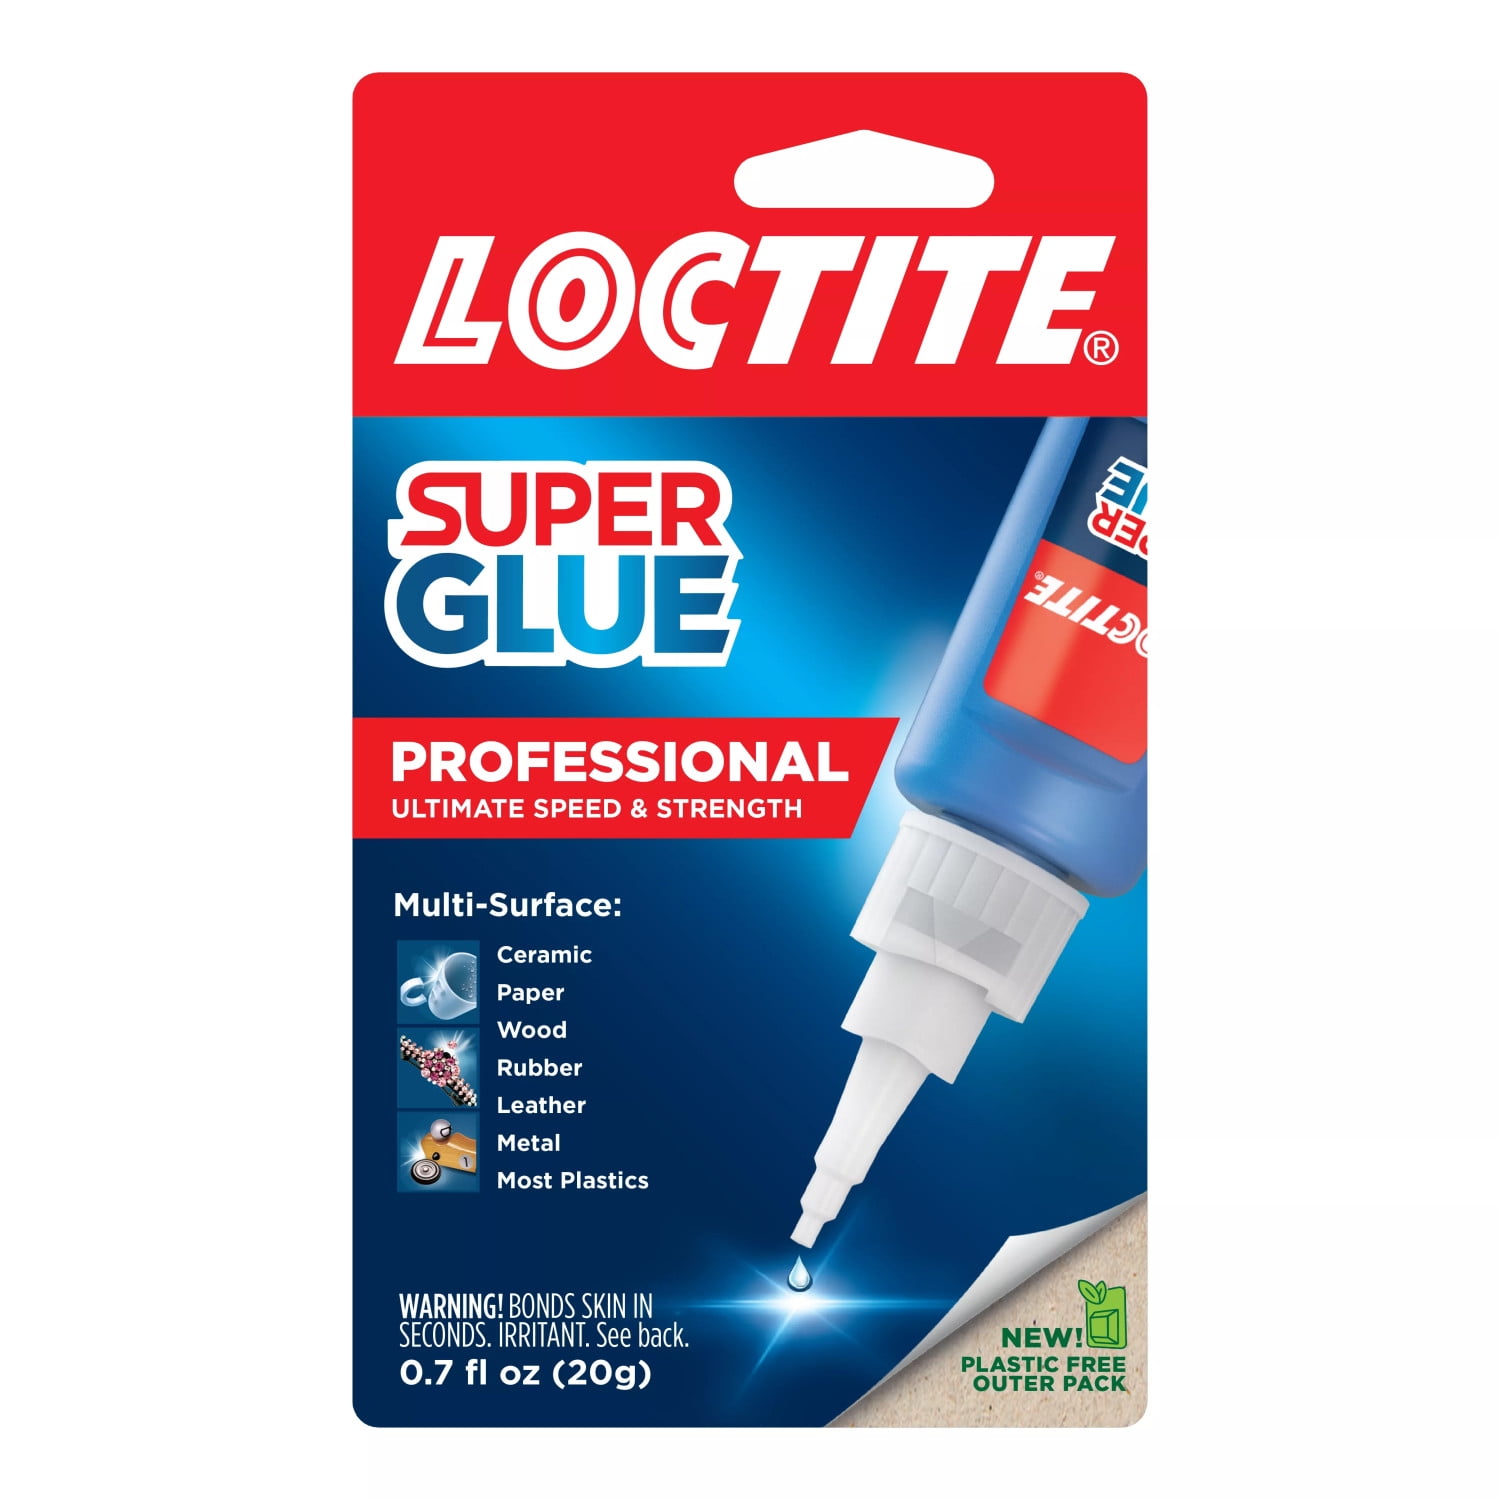 Super Glue 3 Gram Clear Double Pack Bottles [Office Product]